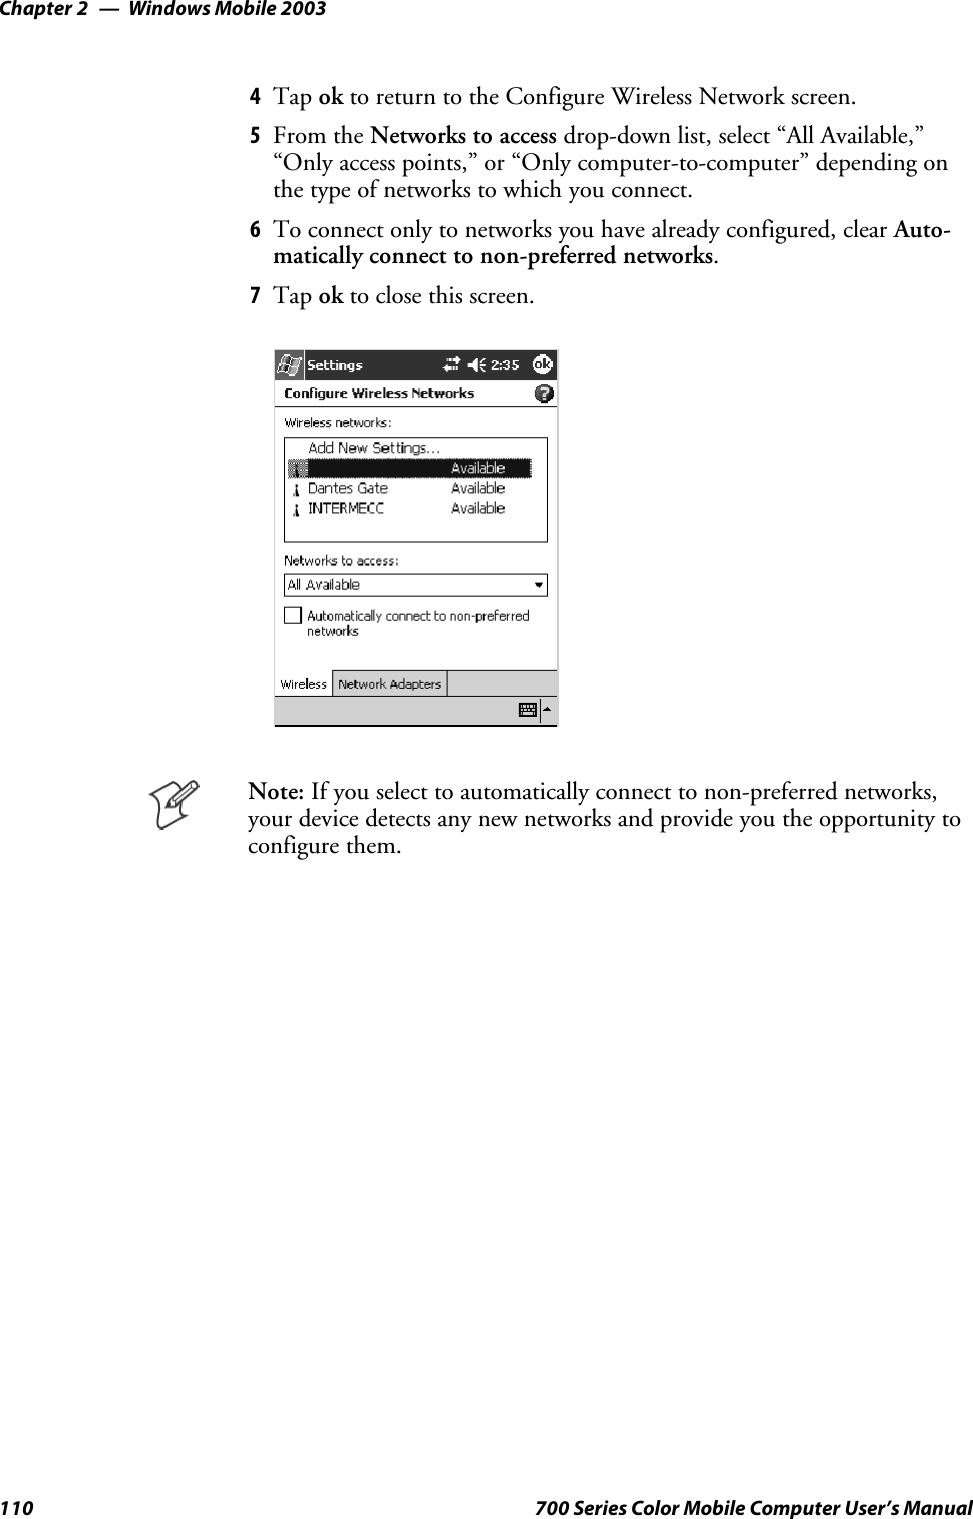 Windows Mobile 2003Chapter —2110 700 Series Color Mobile Computer User’s Manual4Tap ok to return to the Configure Wireless Network screen.5From the Networks to access drop-down list, select “All Available,”“Only access points,” or “Only computer-to-computer” depending onthe type of networks to which you connect.6To connect only to networks you have already configured, clear Auto-matically connect to non-preferred networks.7Tap ok to close this screen.Note: If you select to automatically connect to non-preferred networks,your device detects any new networks and provide you the opportunity toconfigure them.